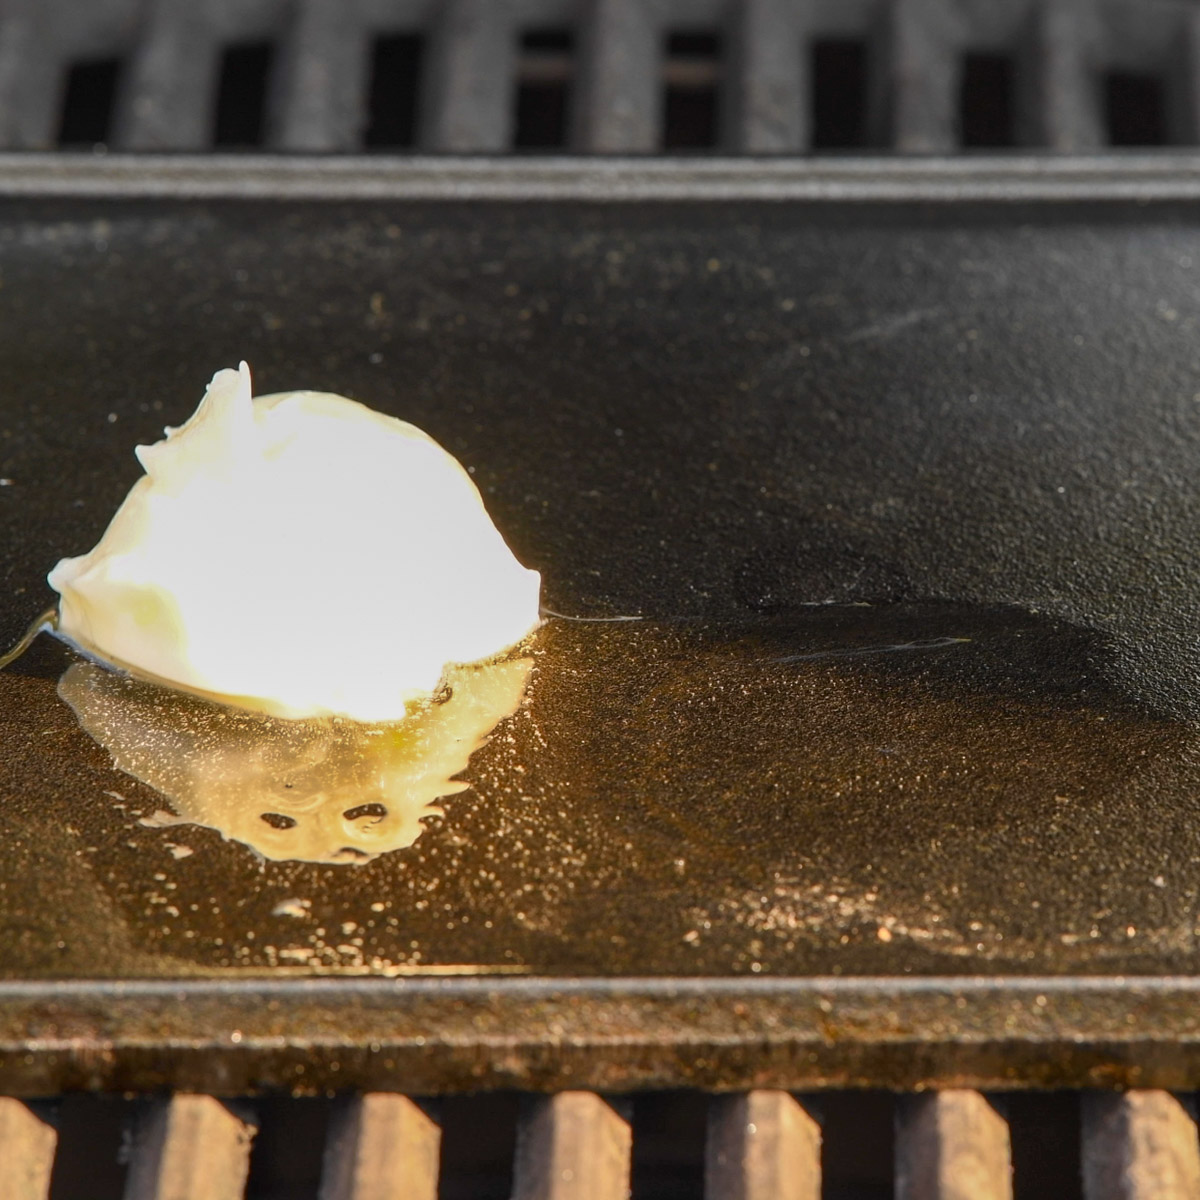 Beef tallow on a hot griddle.